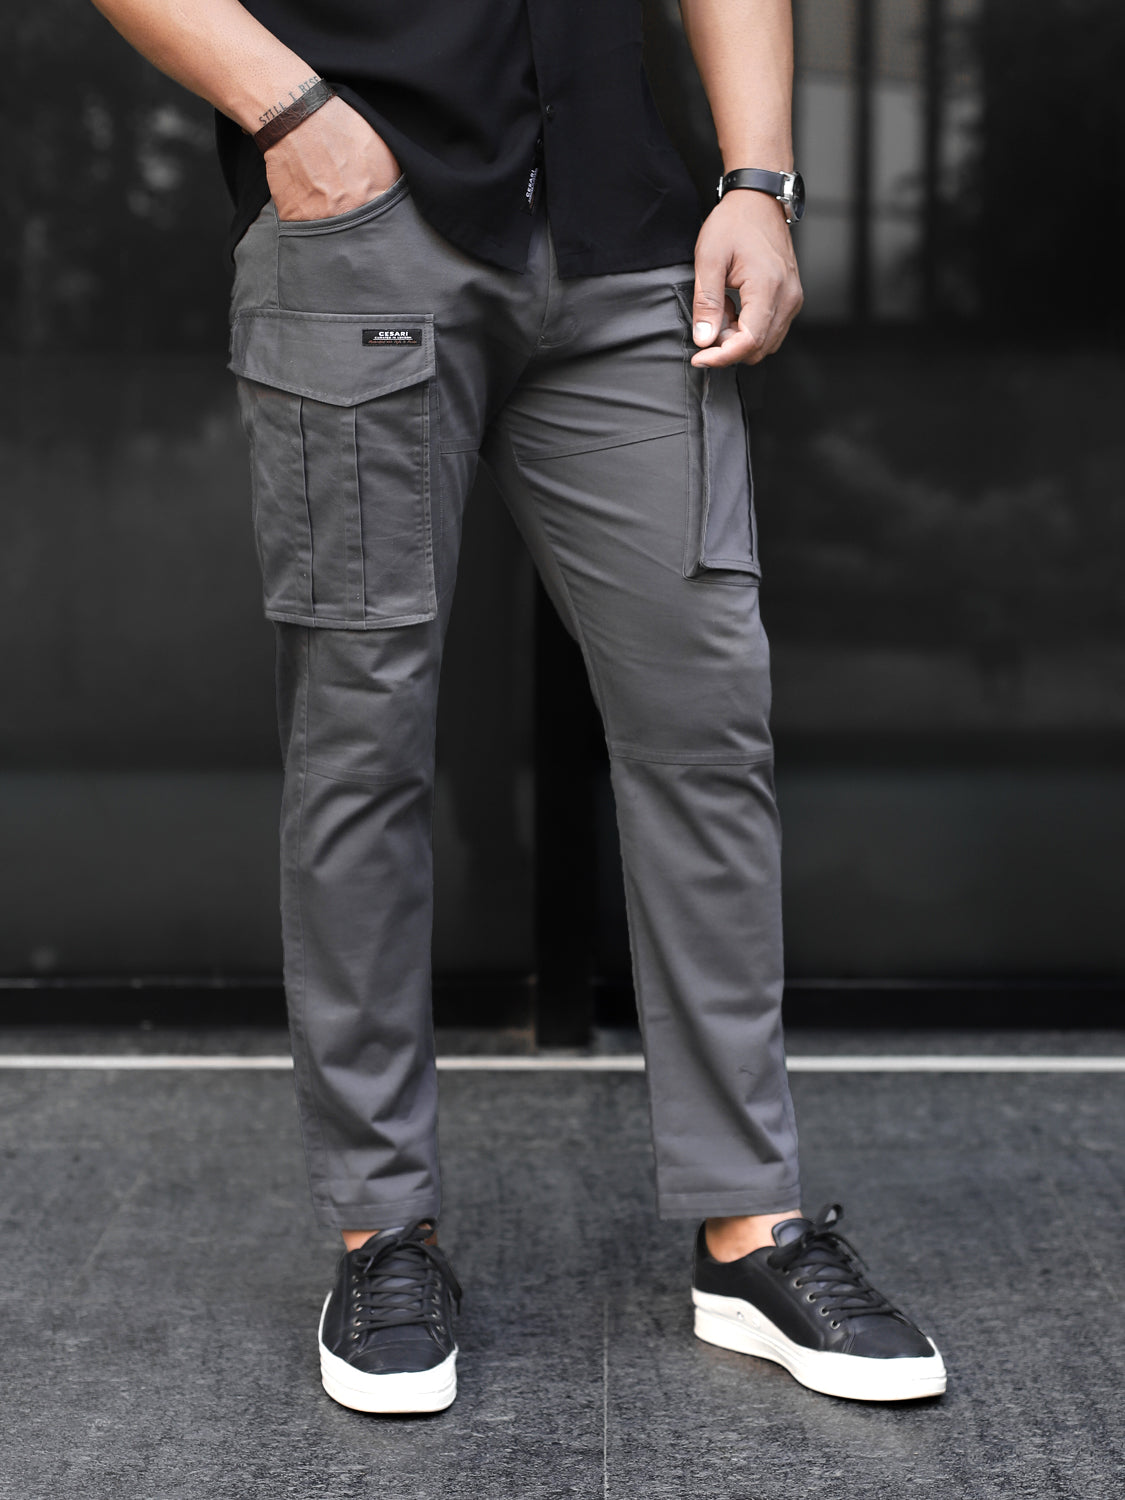 Buy LIFE Mens 6 Pocket Solid Cargo Pants | Shoppers Stop